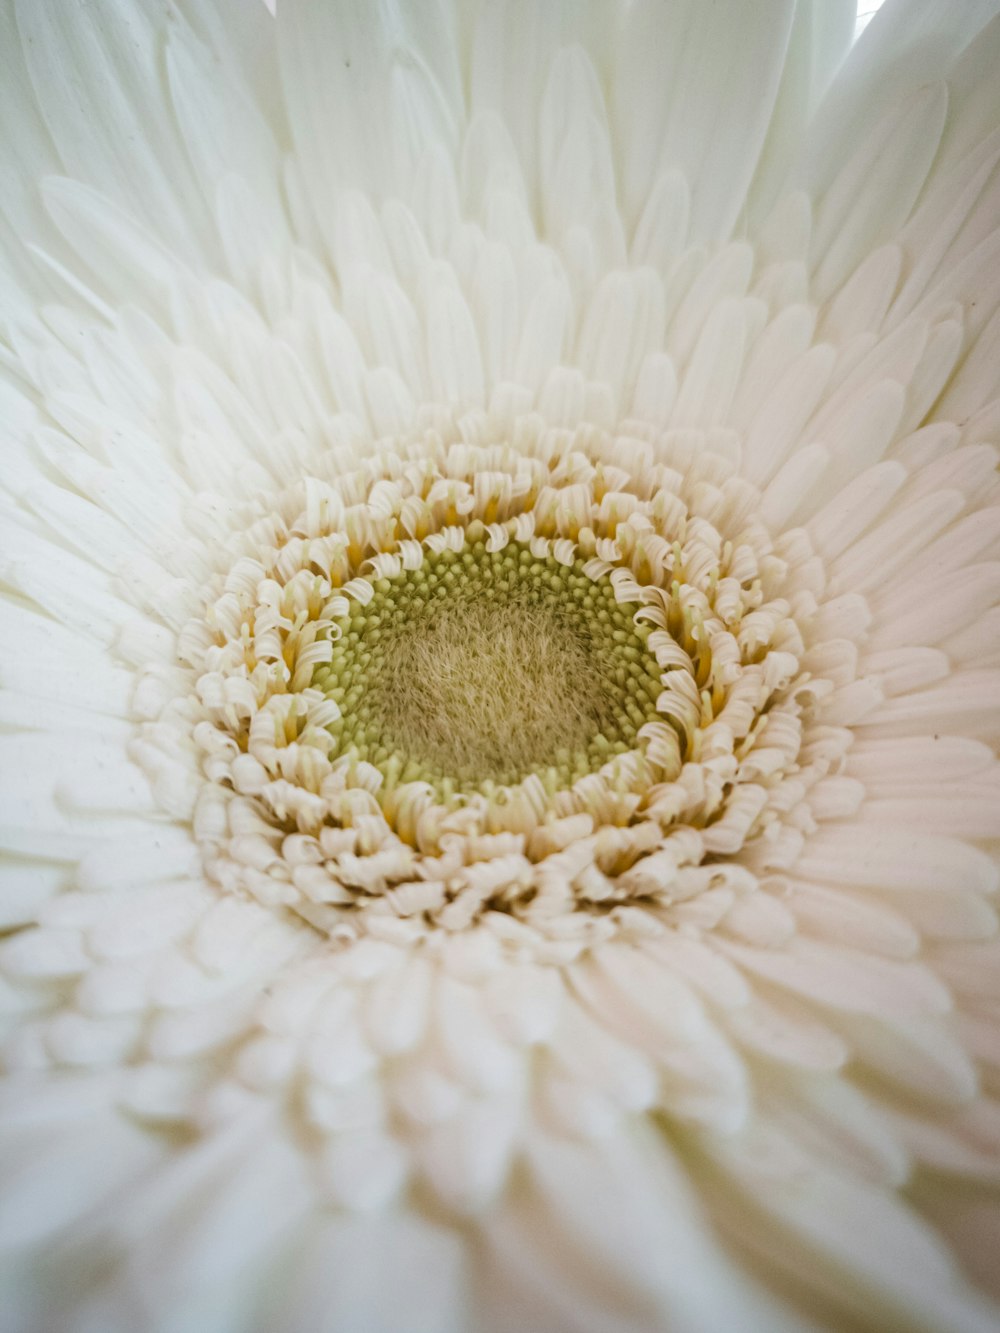 a large white flower with a green center